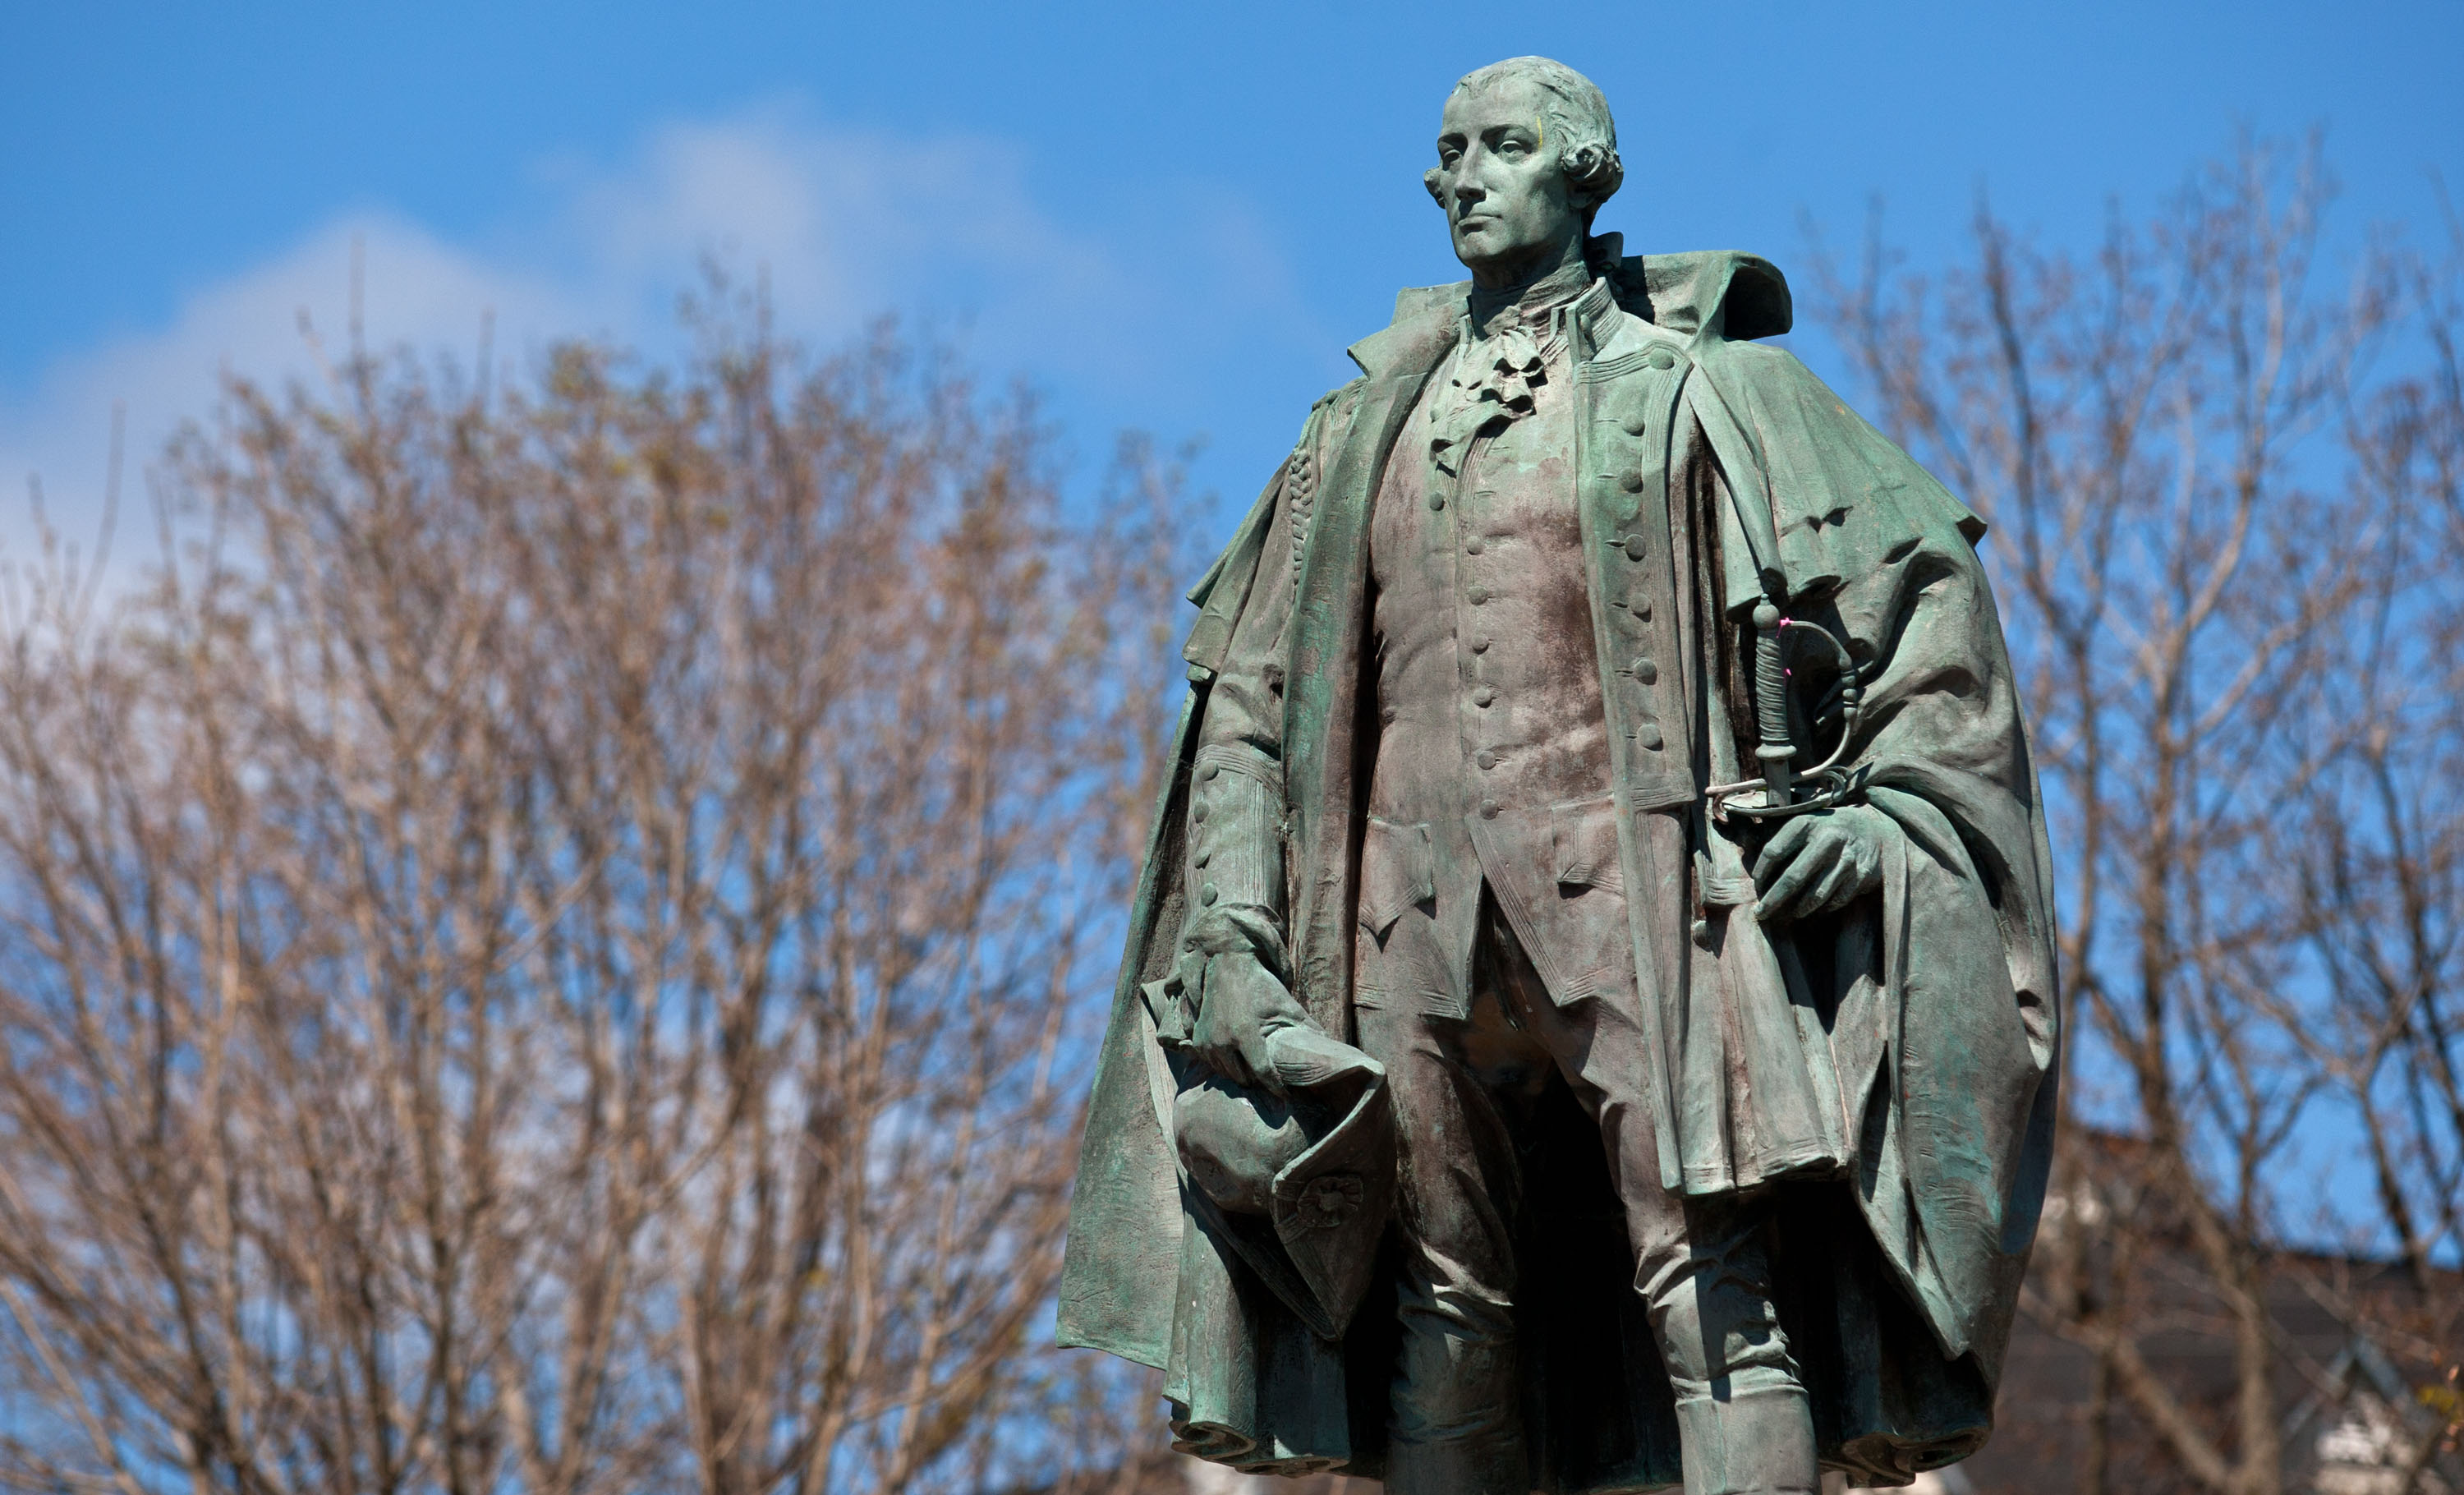 Cornwallis and Ryerson: Heroes or Villains?